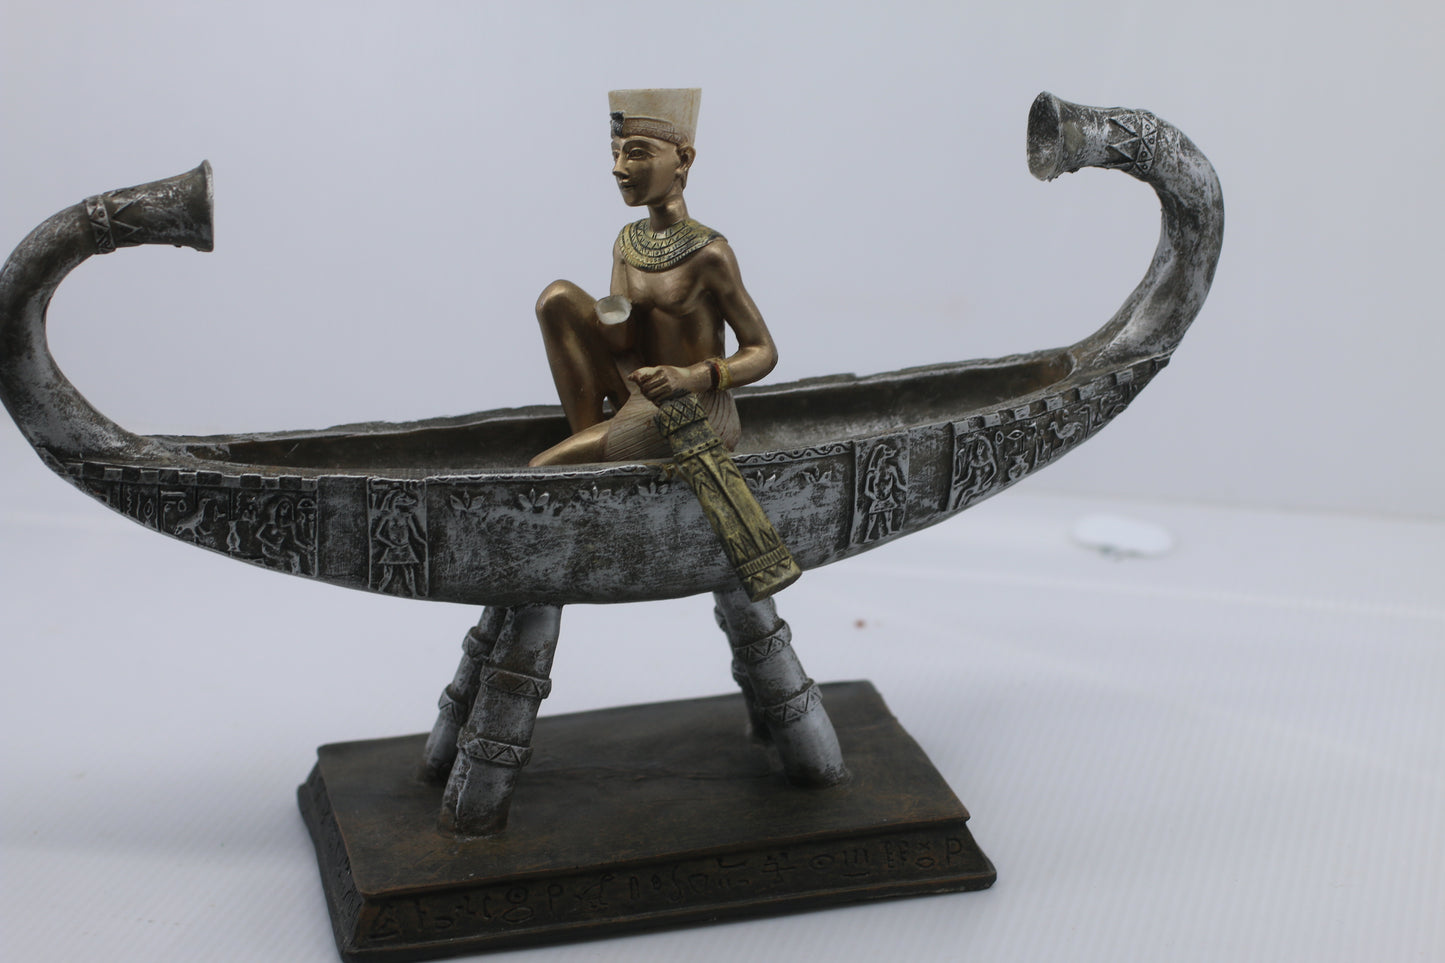 Goddess Isis on The Nile Statue Egypt, Queen Cleopatra Lotus Boat, Collectable.